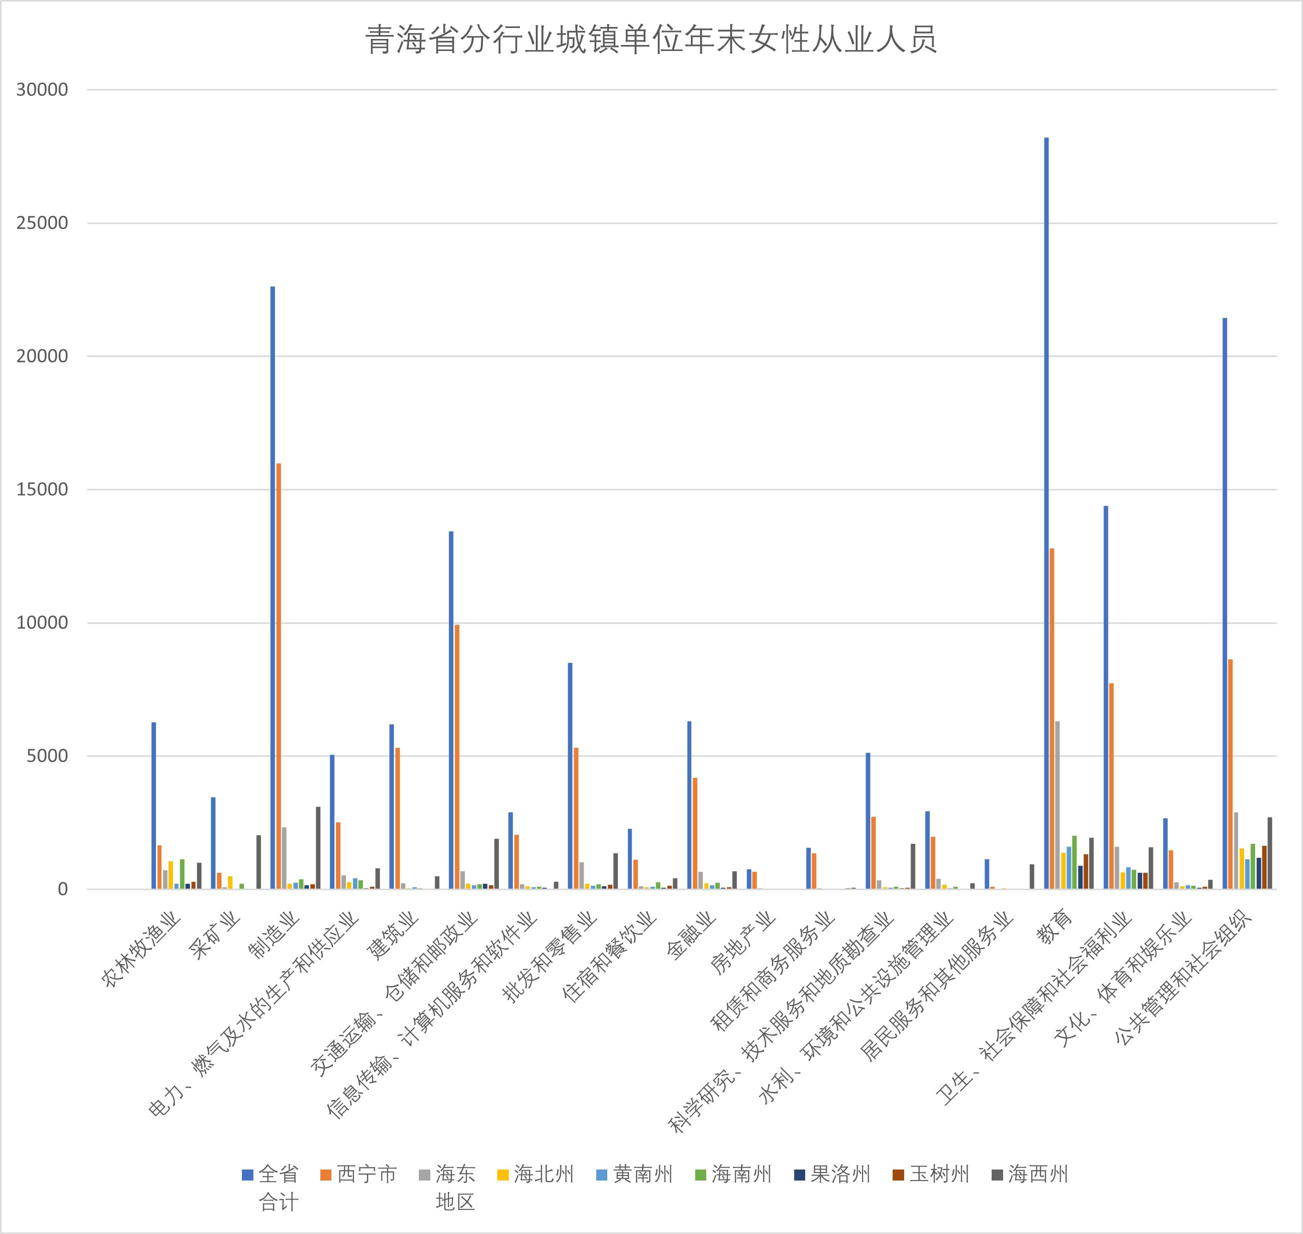 Female employees in urban units of different industries in Qinghai Province (1995-2005)